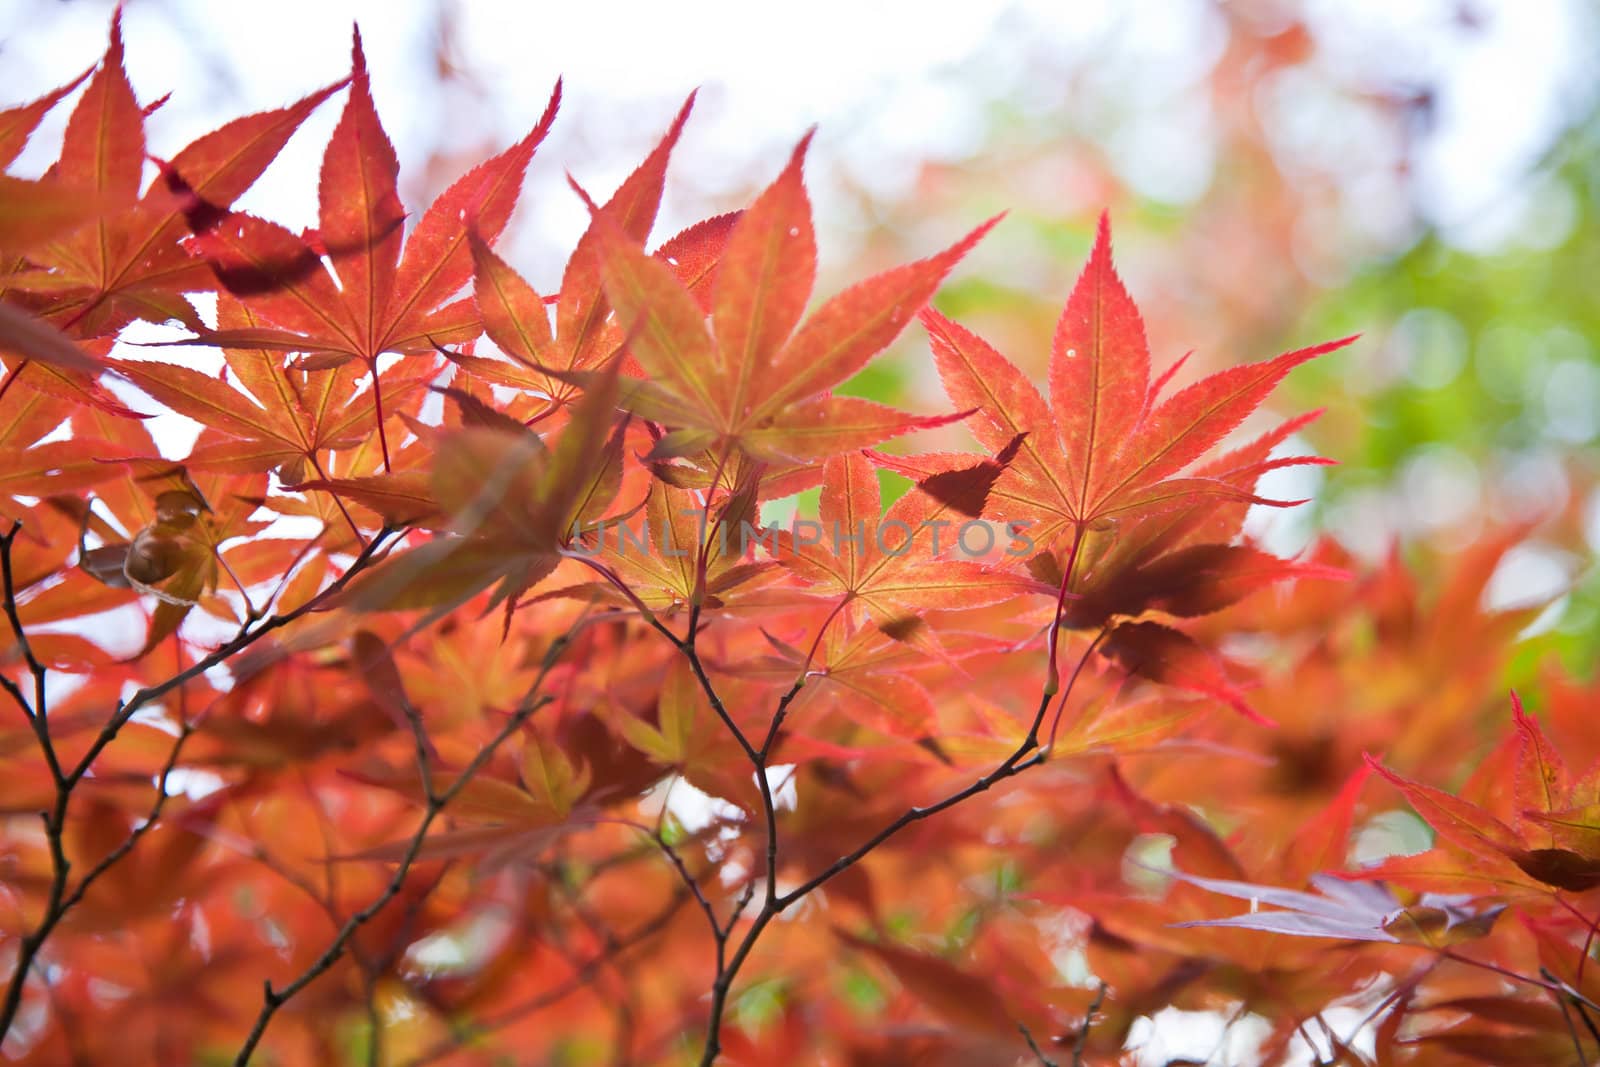 Autumnal at Japen, Mable leaves will changed from green to Red.